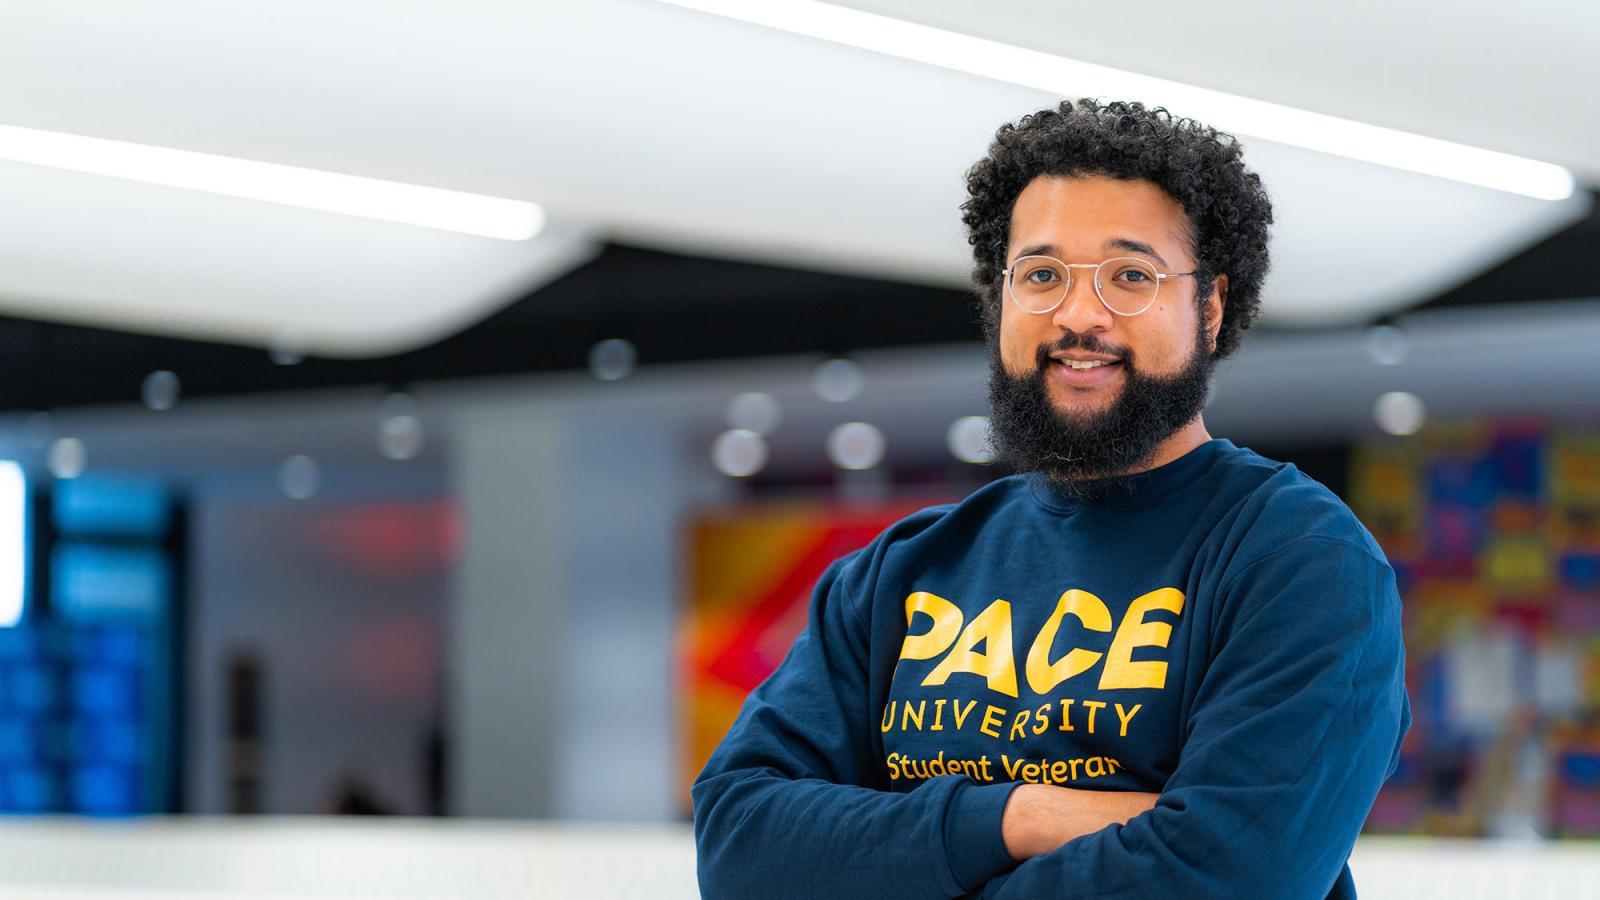 Student veteran with their Pace University-branded clothing